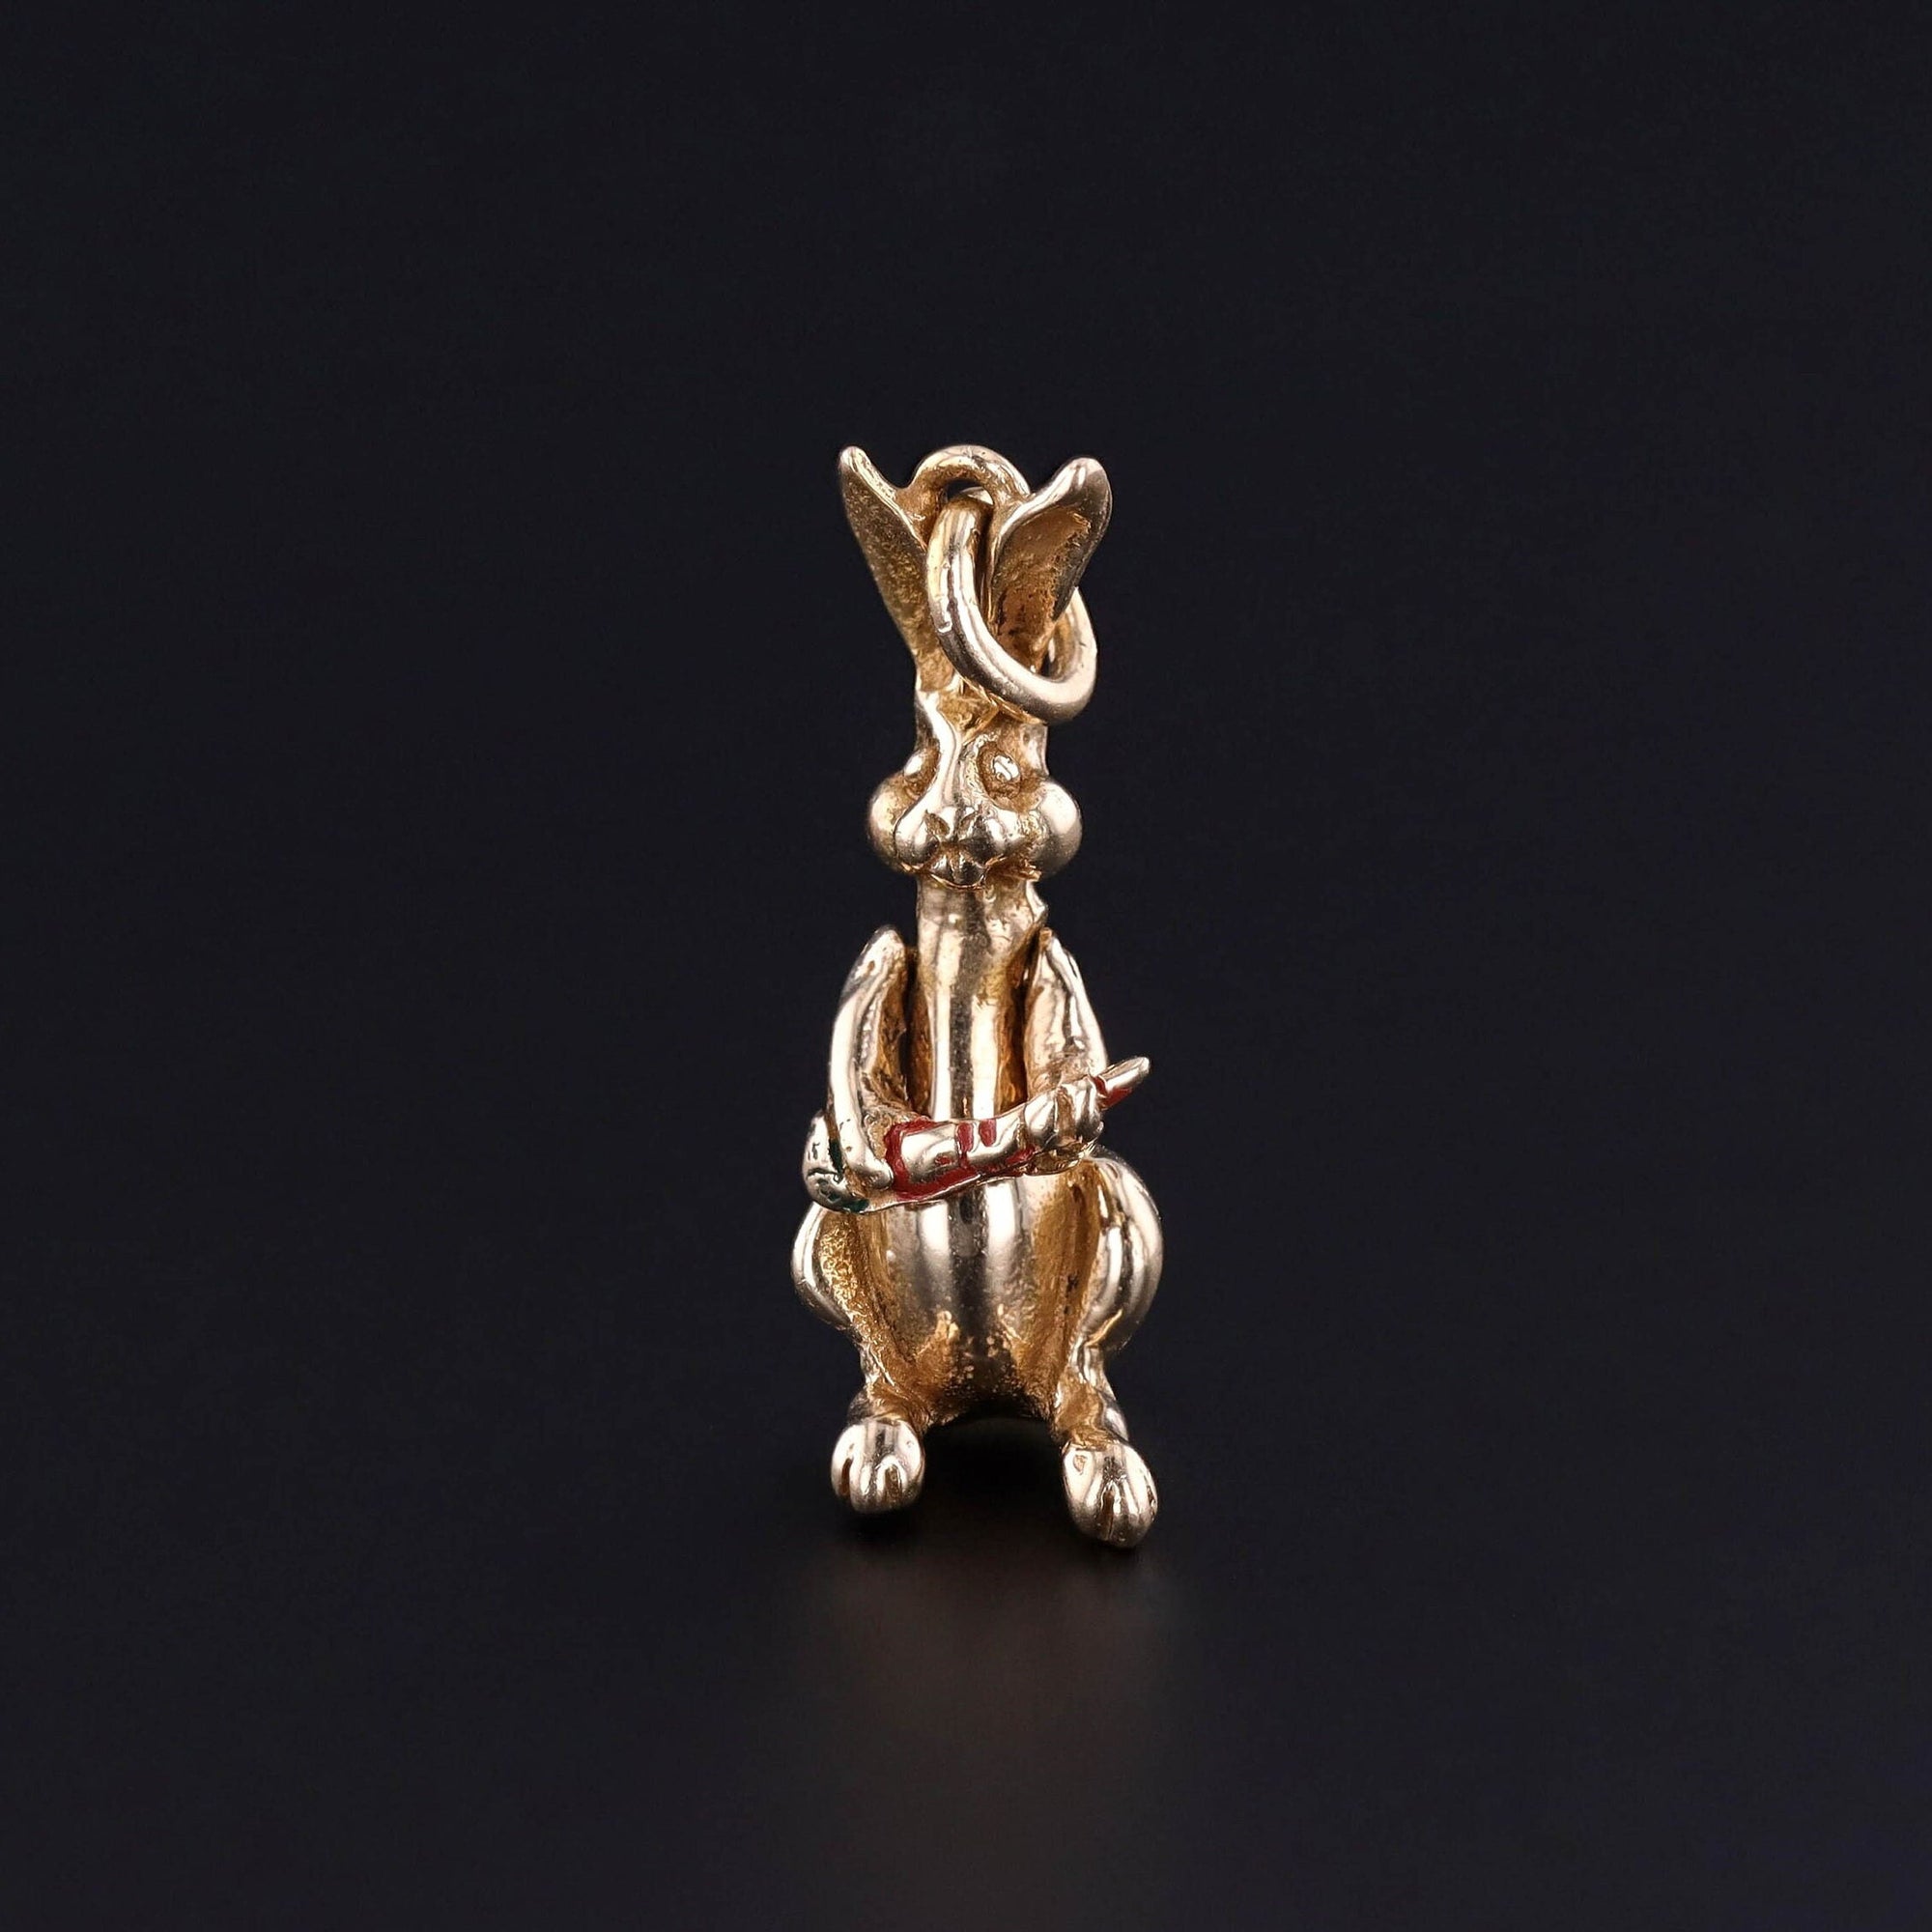 A solid gold moveable bunny rabbit charm. The rabbit holds a carrot in its arms and the arms raise to bring the carrot to its mouth. The piece dates to the 1950s- 1960s. It is in good condition with some wear to the enamel on the carrot.